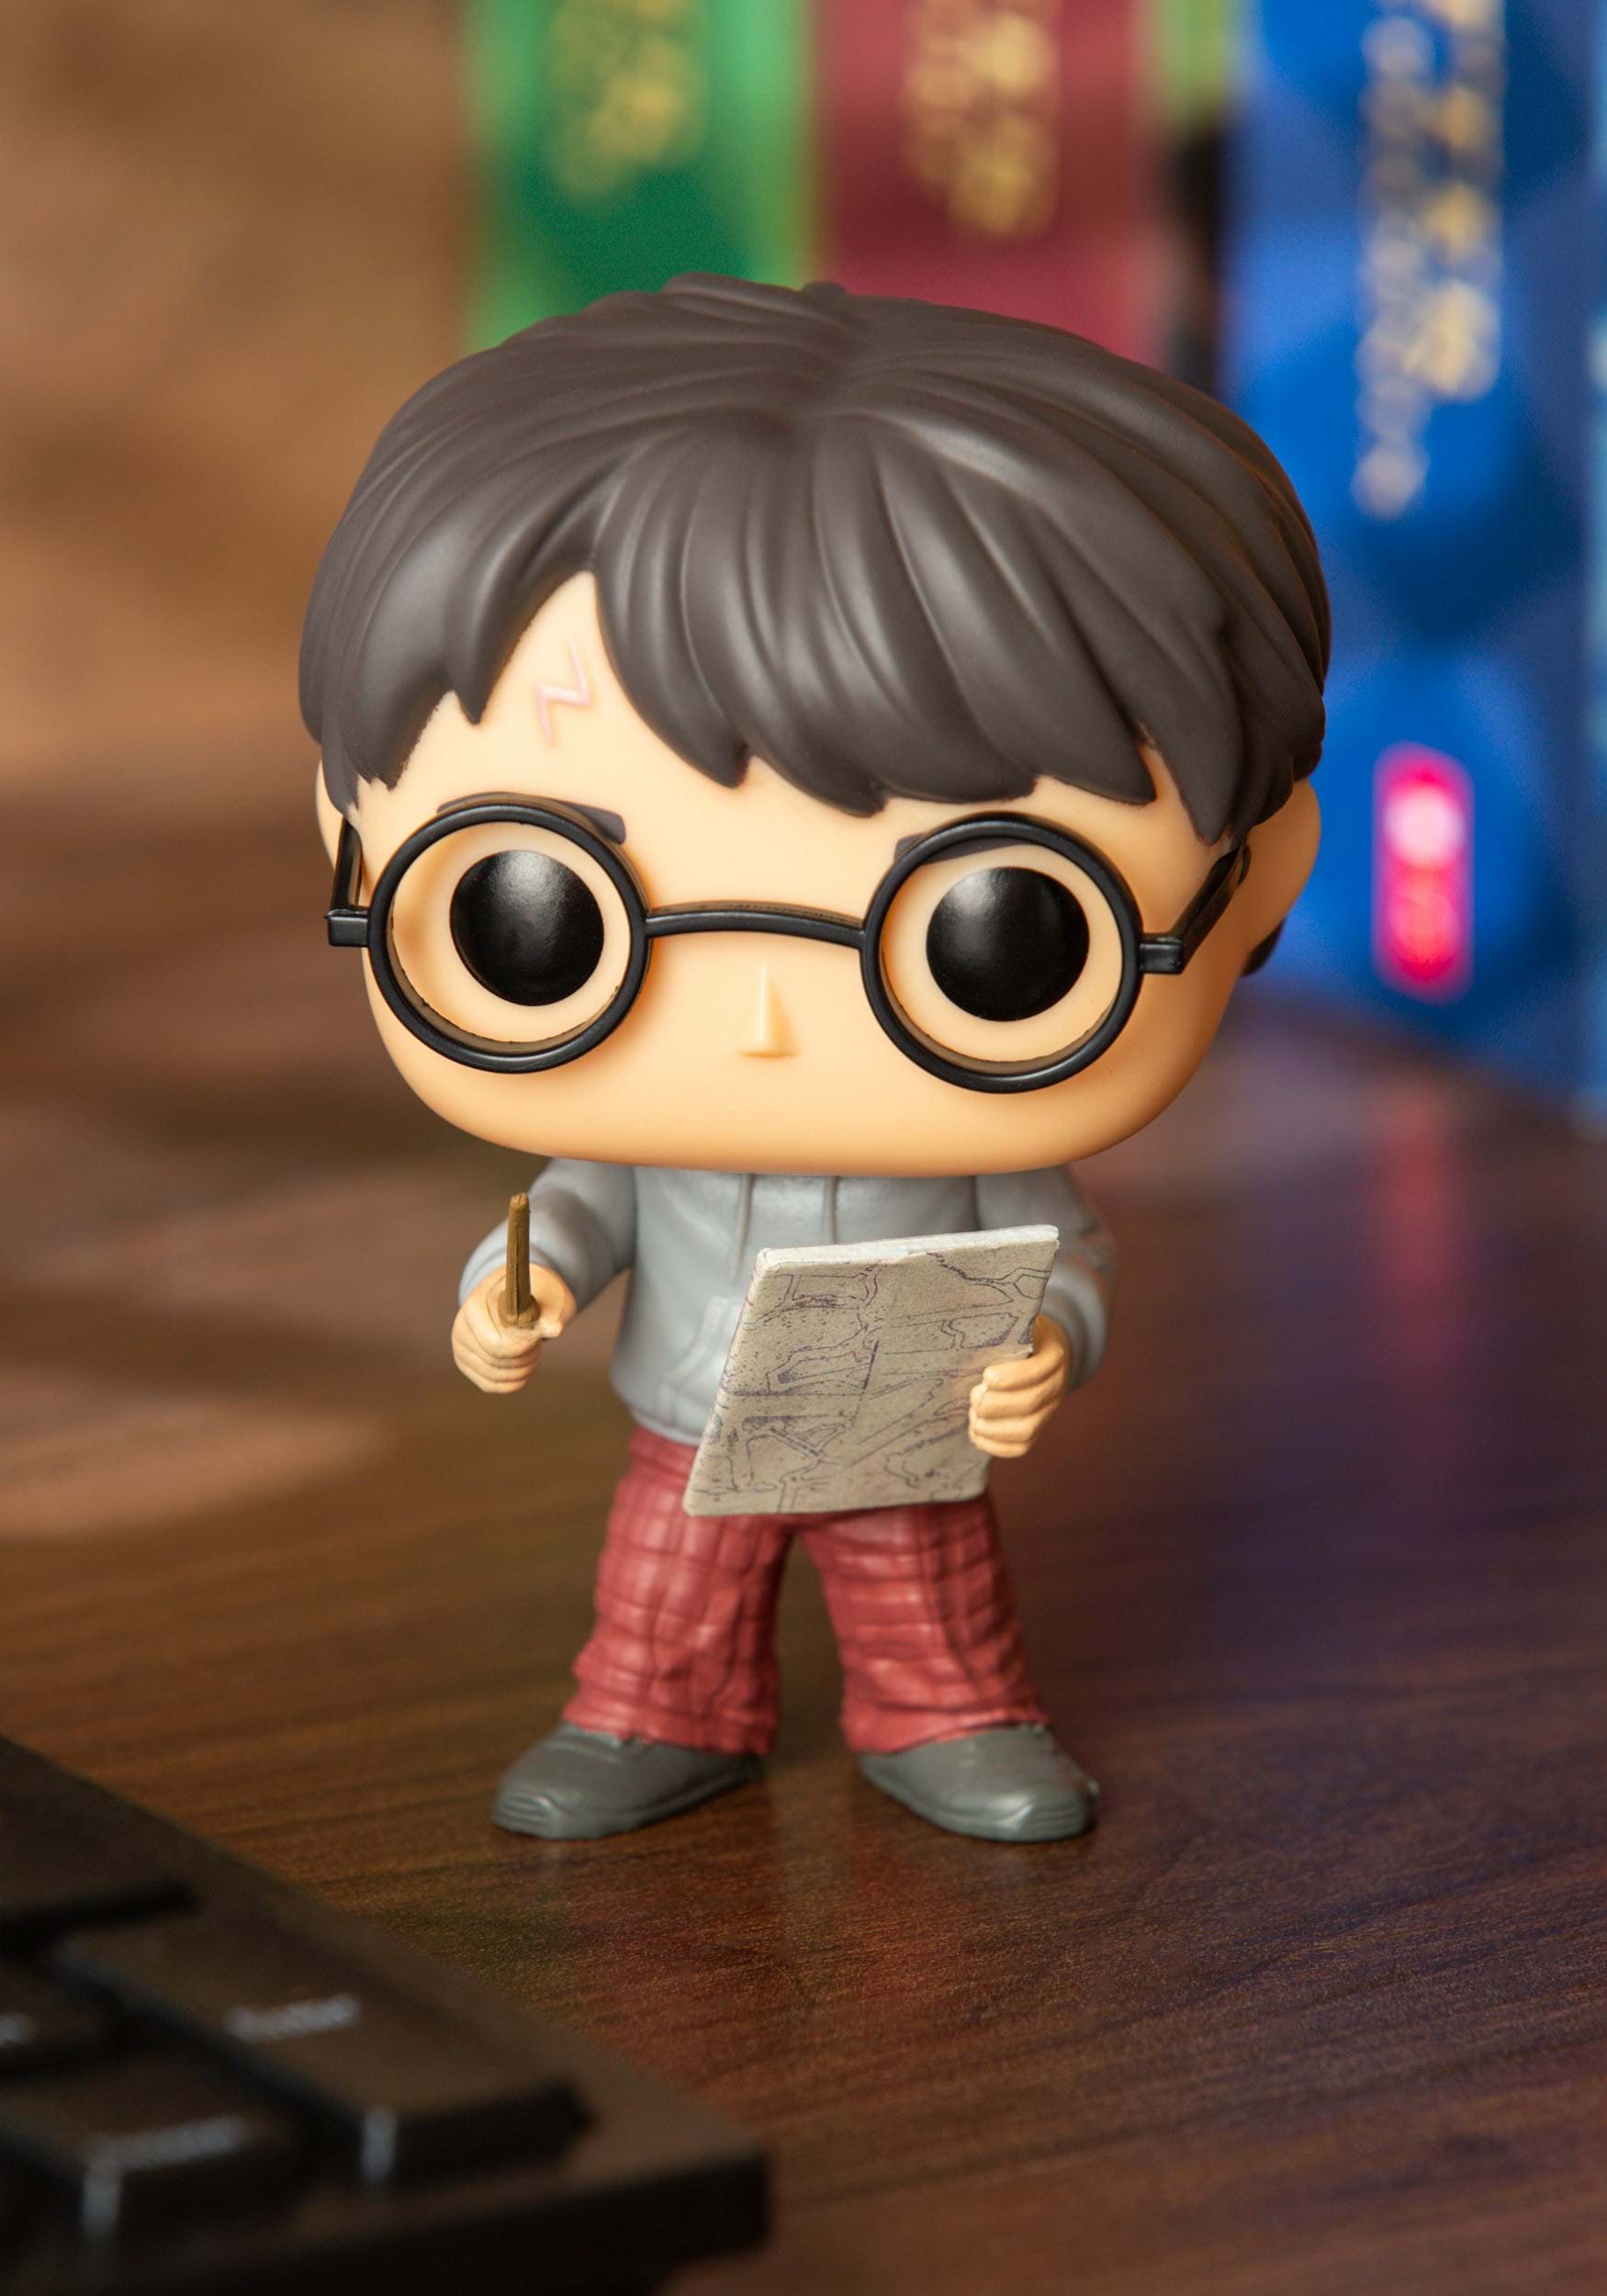 Funko POP! Harry Potter with Prophecy Figurine